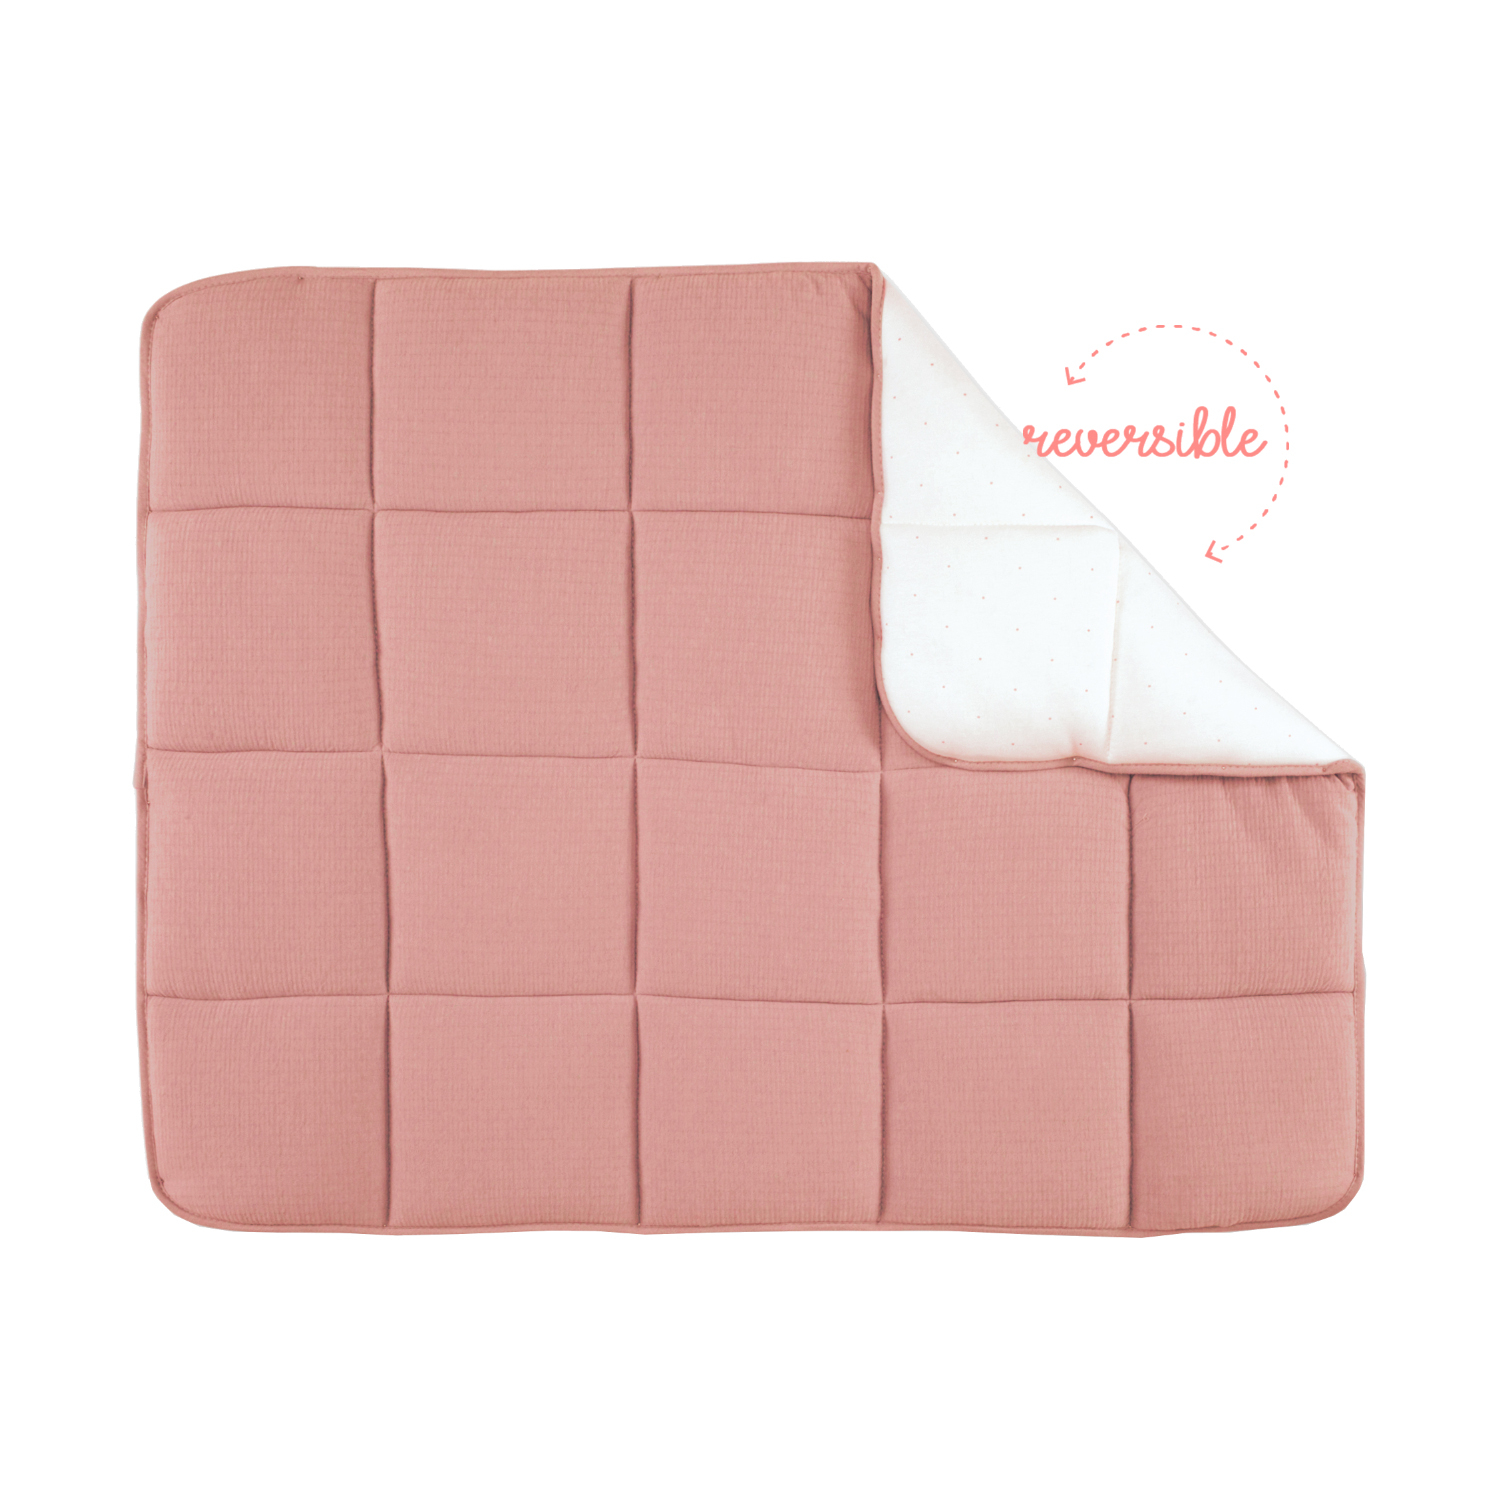 Bemini Quilted Boxkleed Sienna Bambi 75 x 95 cm